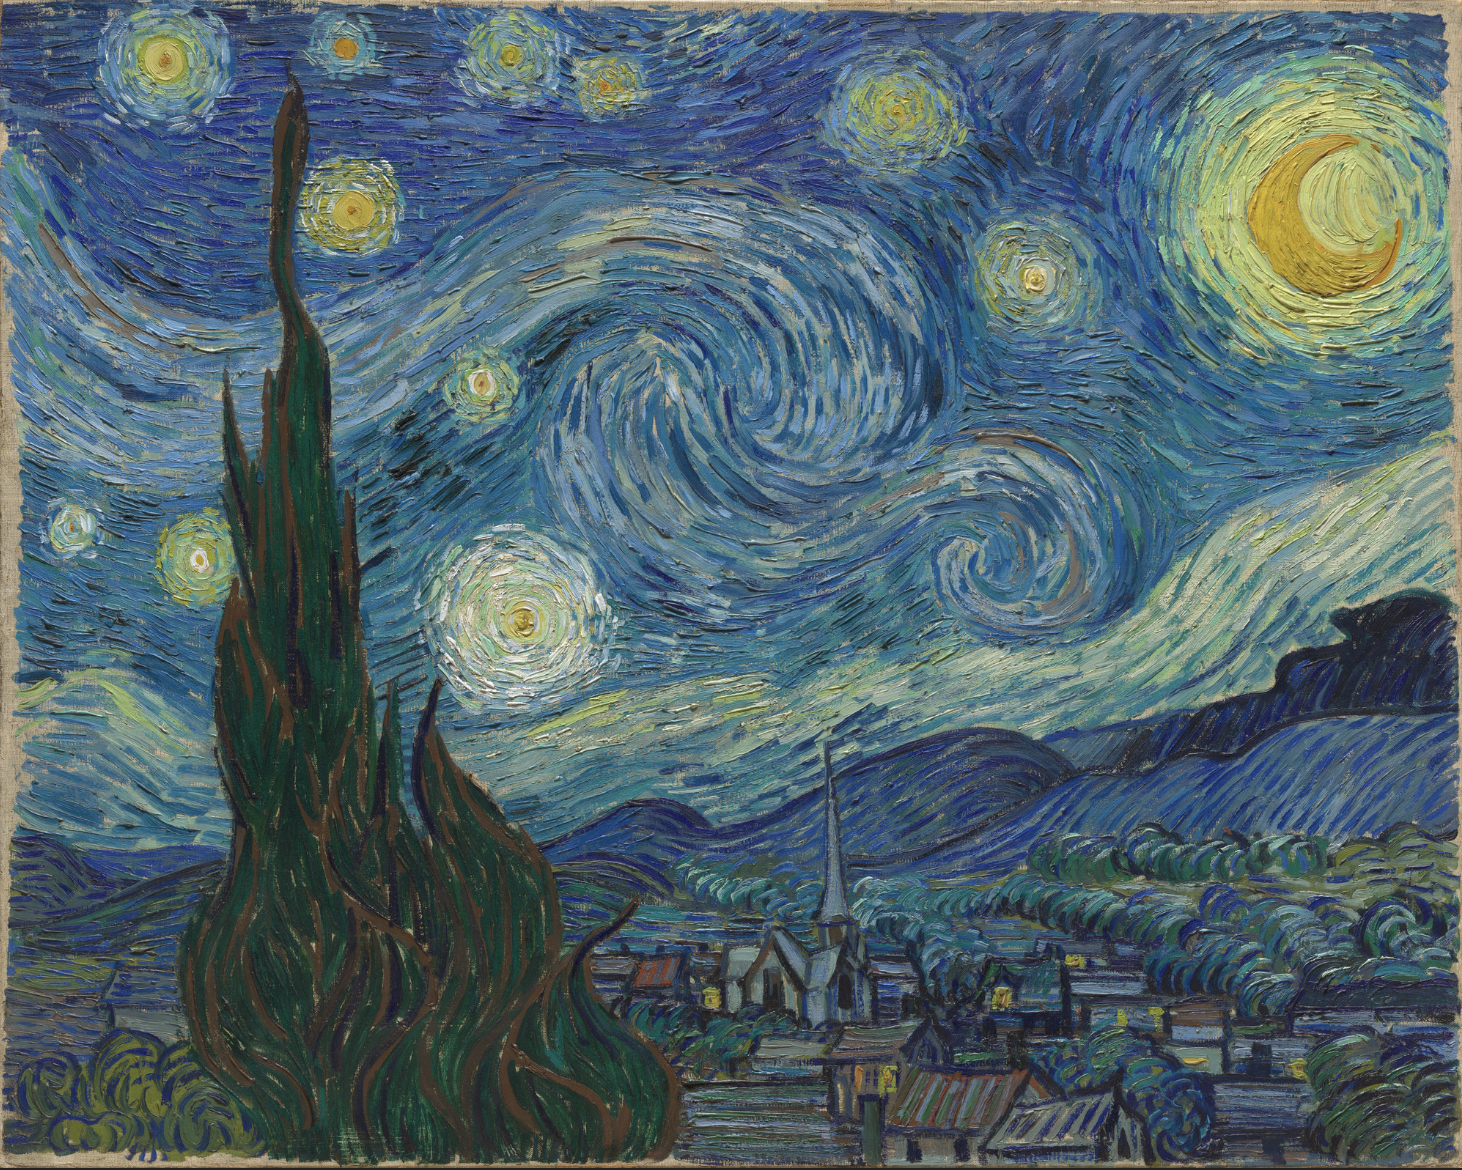 Vincent van Gogh, The Starry Night, Saint Rémy, June 1889. On view at MoMA, Floor 5, 502, The Alfred H. Barr, Jr. Galleries.